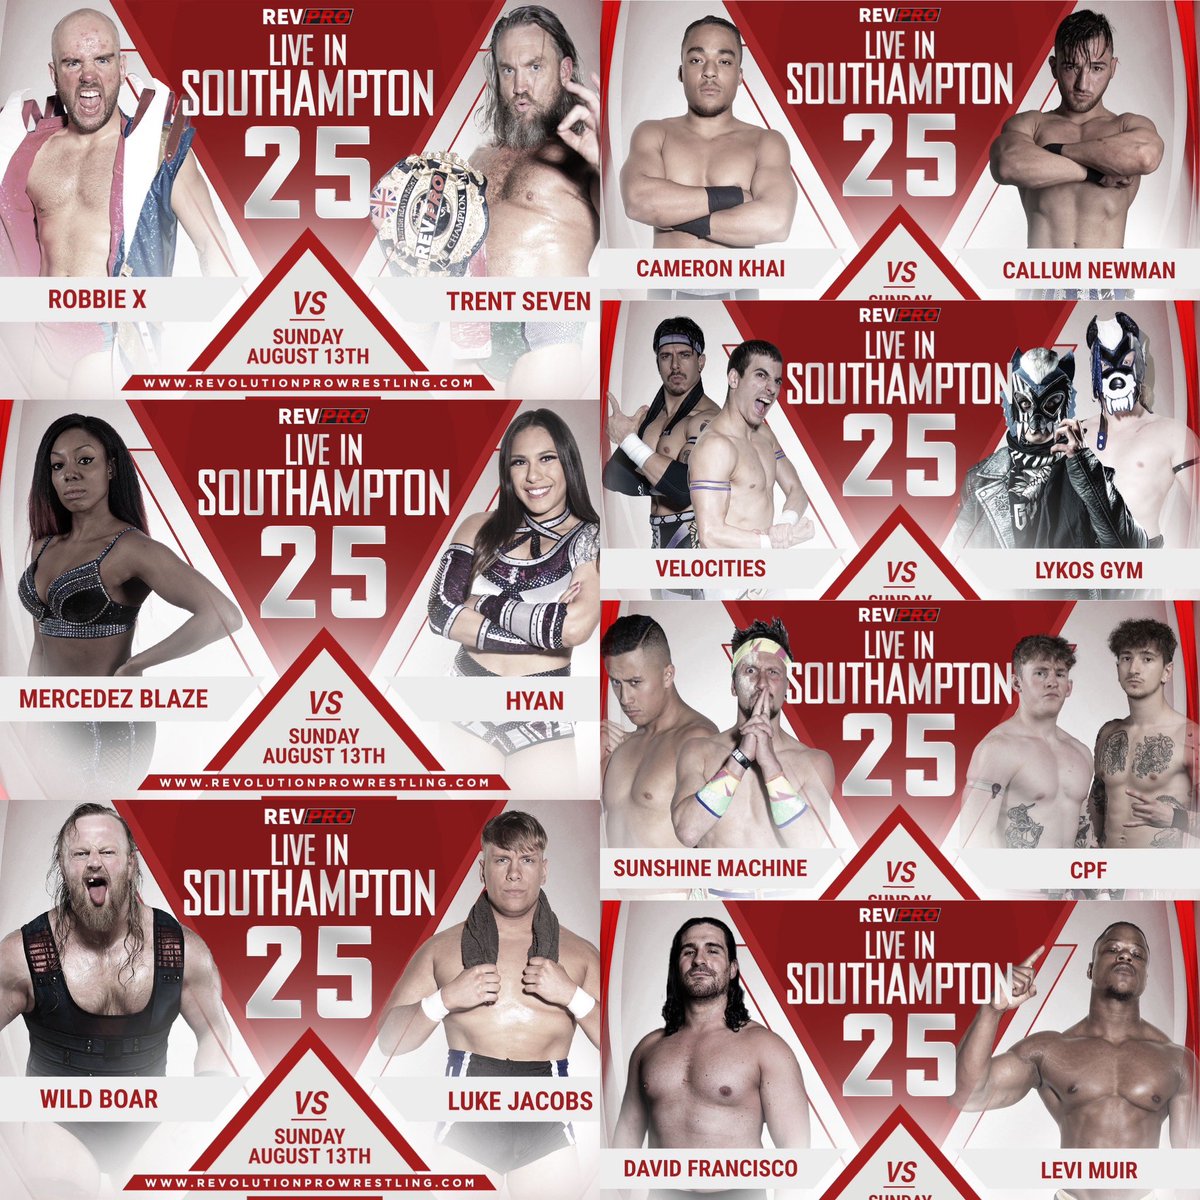 TOMORROW IN SOUTHAMPTON! Doors 4pm l Bell Time 4.30pm Tickets: revolutionprowrestling.com/southampton25 JOIN US!